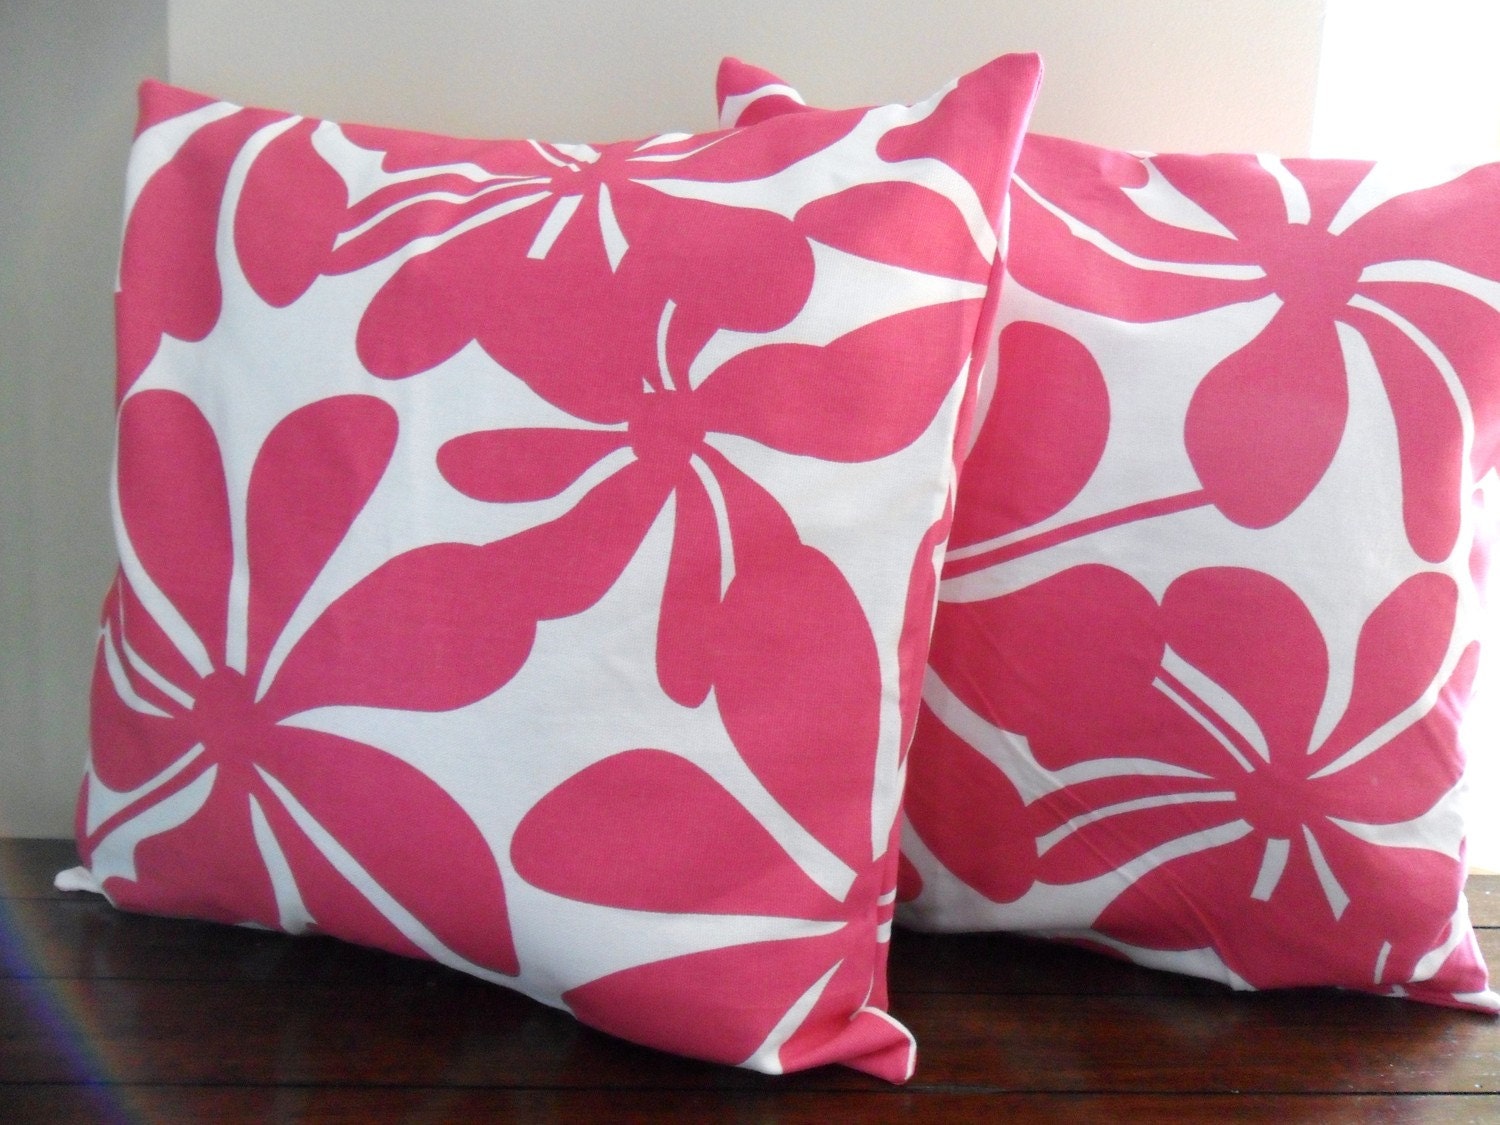 Mod Hot Pink and White Pillow Cover 16x16 - Set of 2 - Designer Fabric - Throw Pillow - Accent Pillow